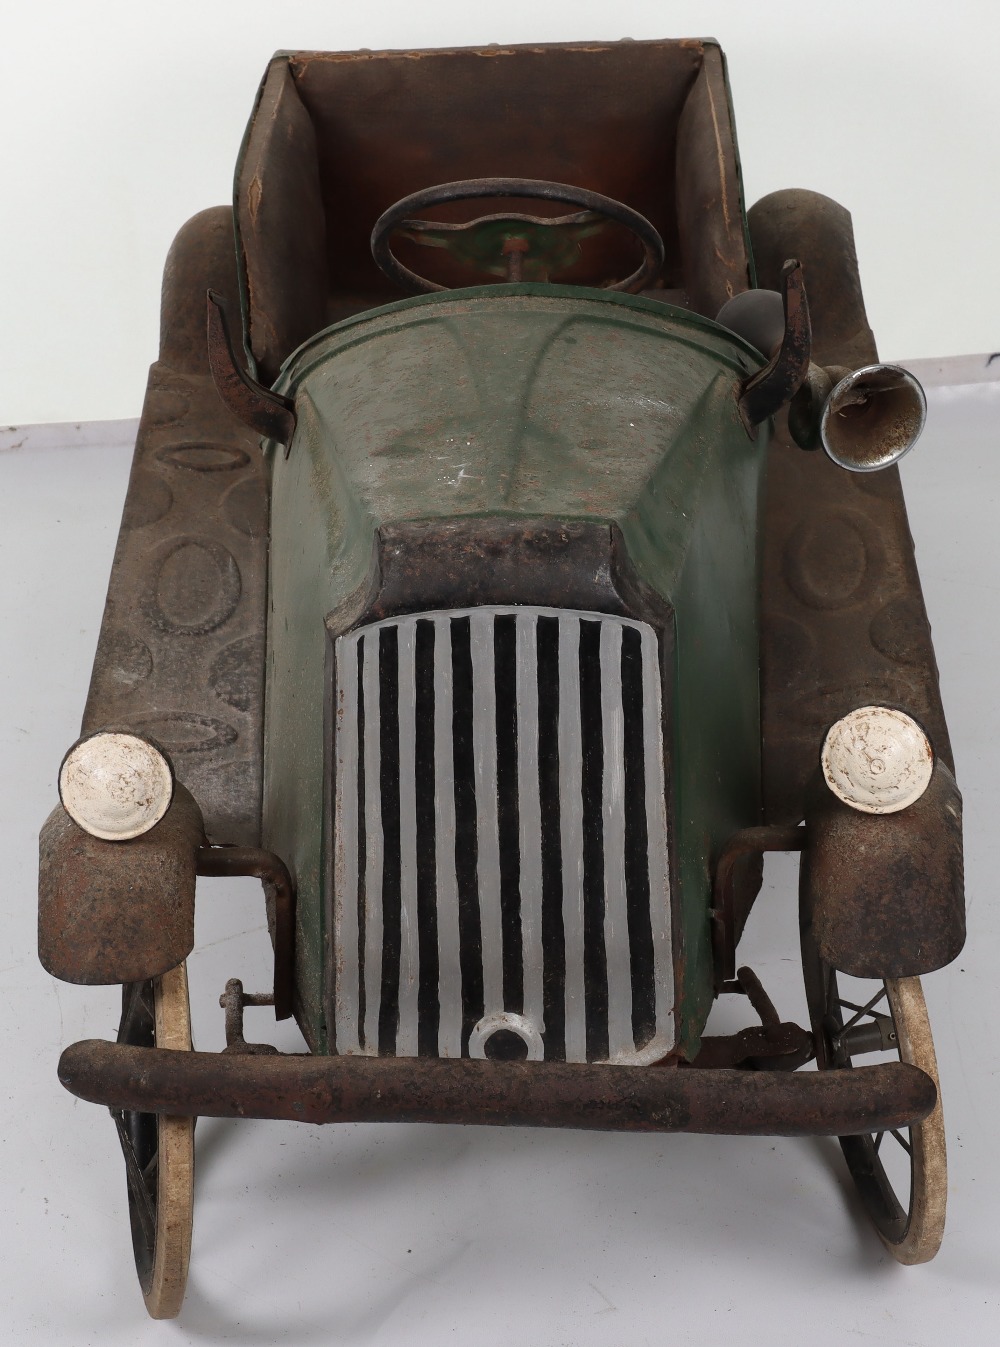 A Tri-ang pressed steel Vauxhall child’s pedal car, English circa 1940 - Image 2 of 10